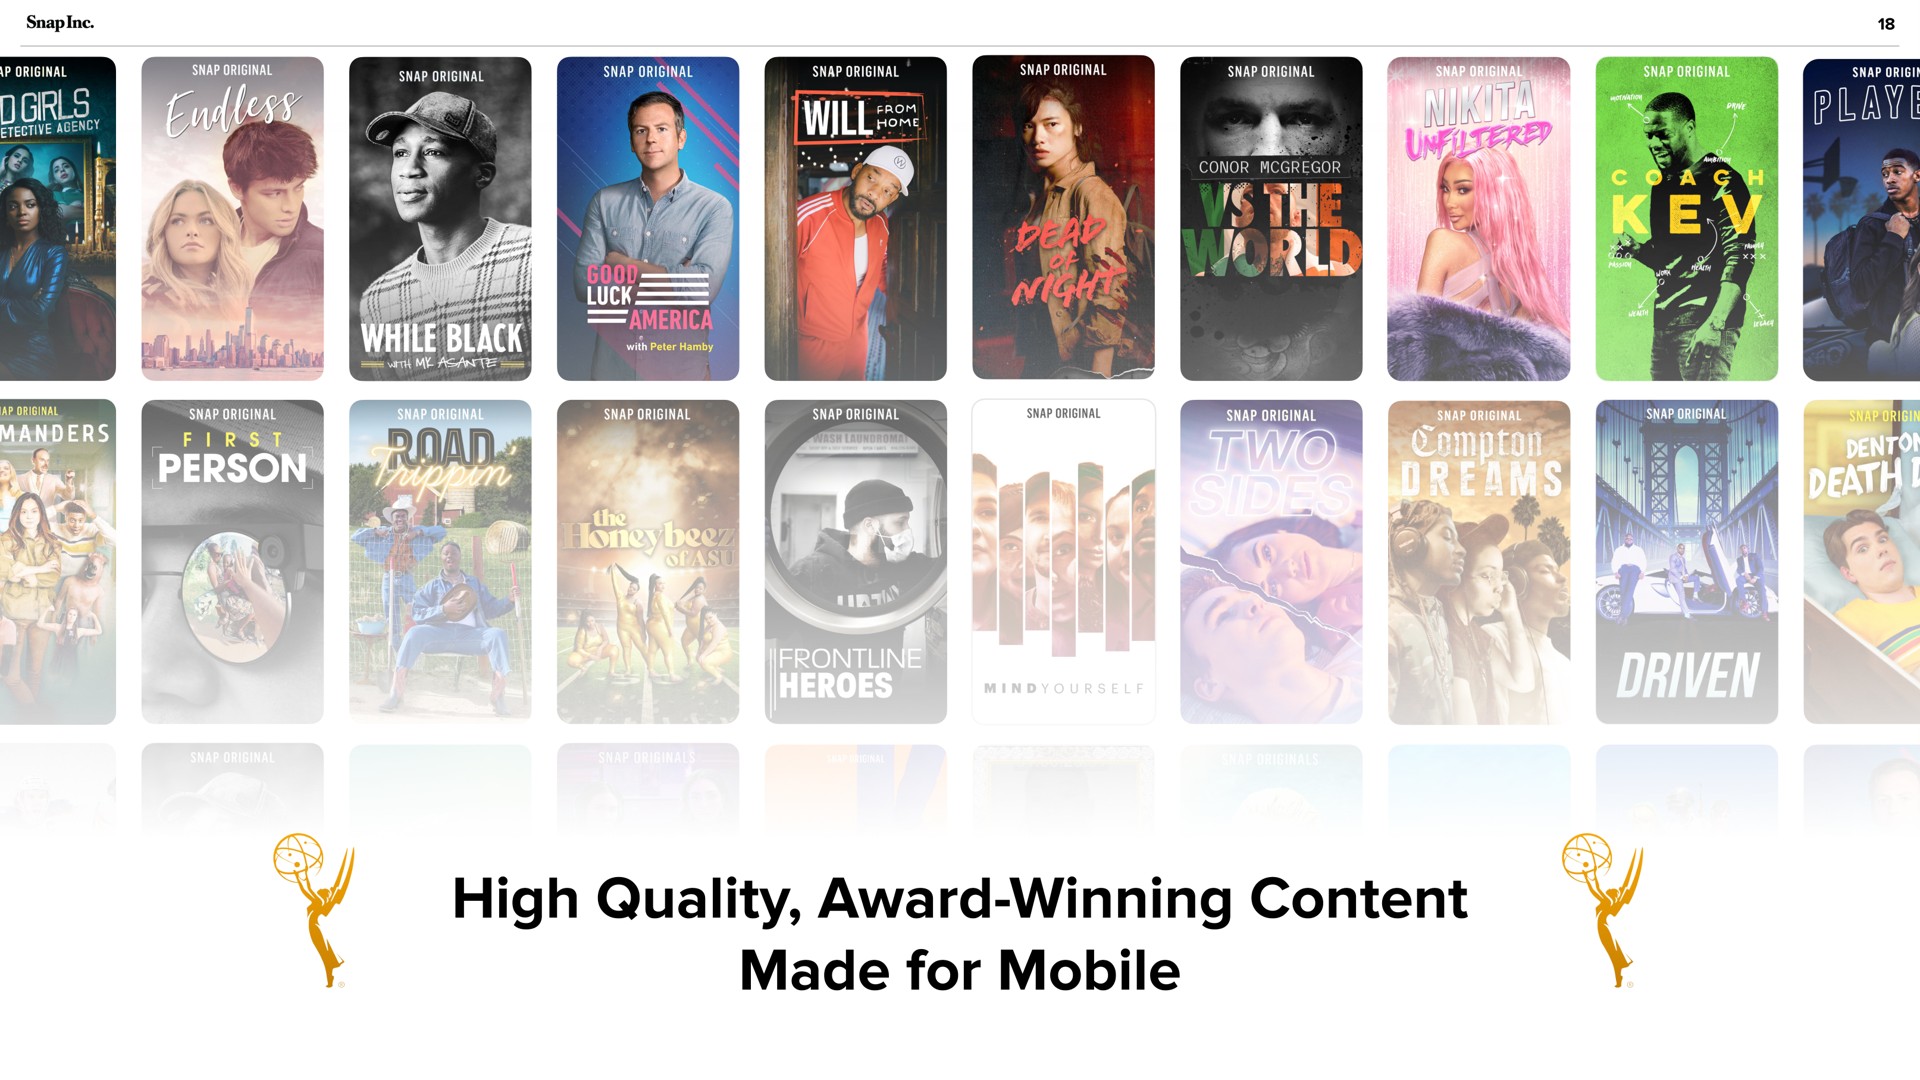 high quality award winning content made for mobile | Snap Inc